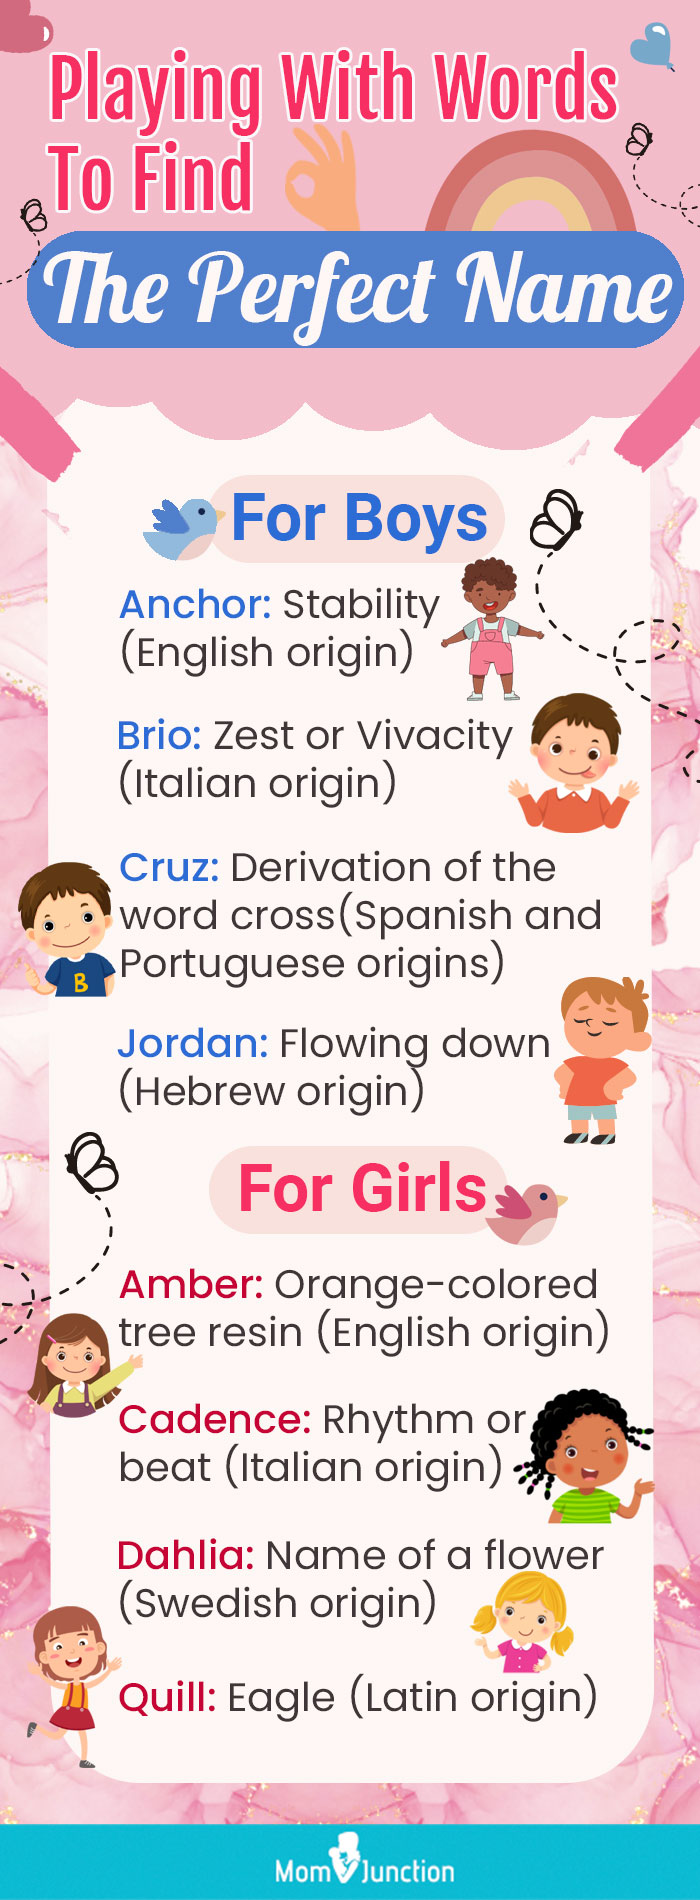 playing with words to find the perfect name [infographic]